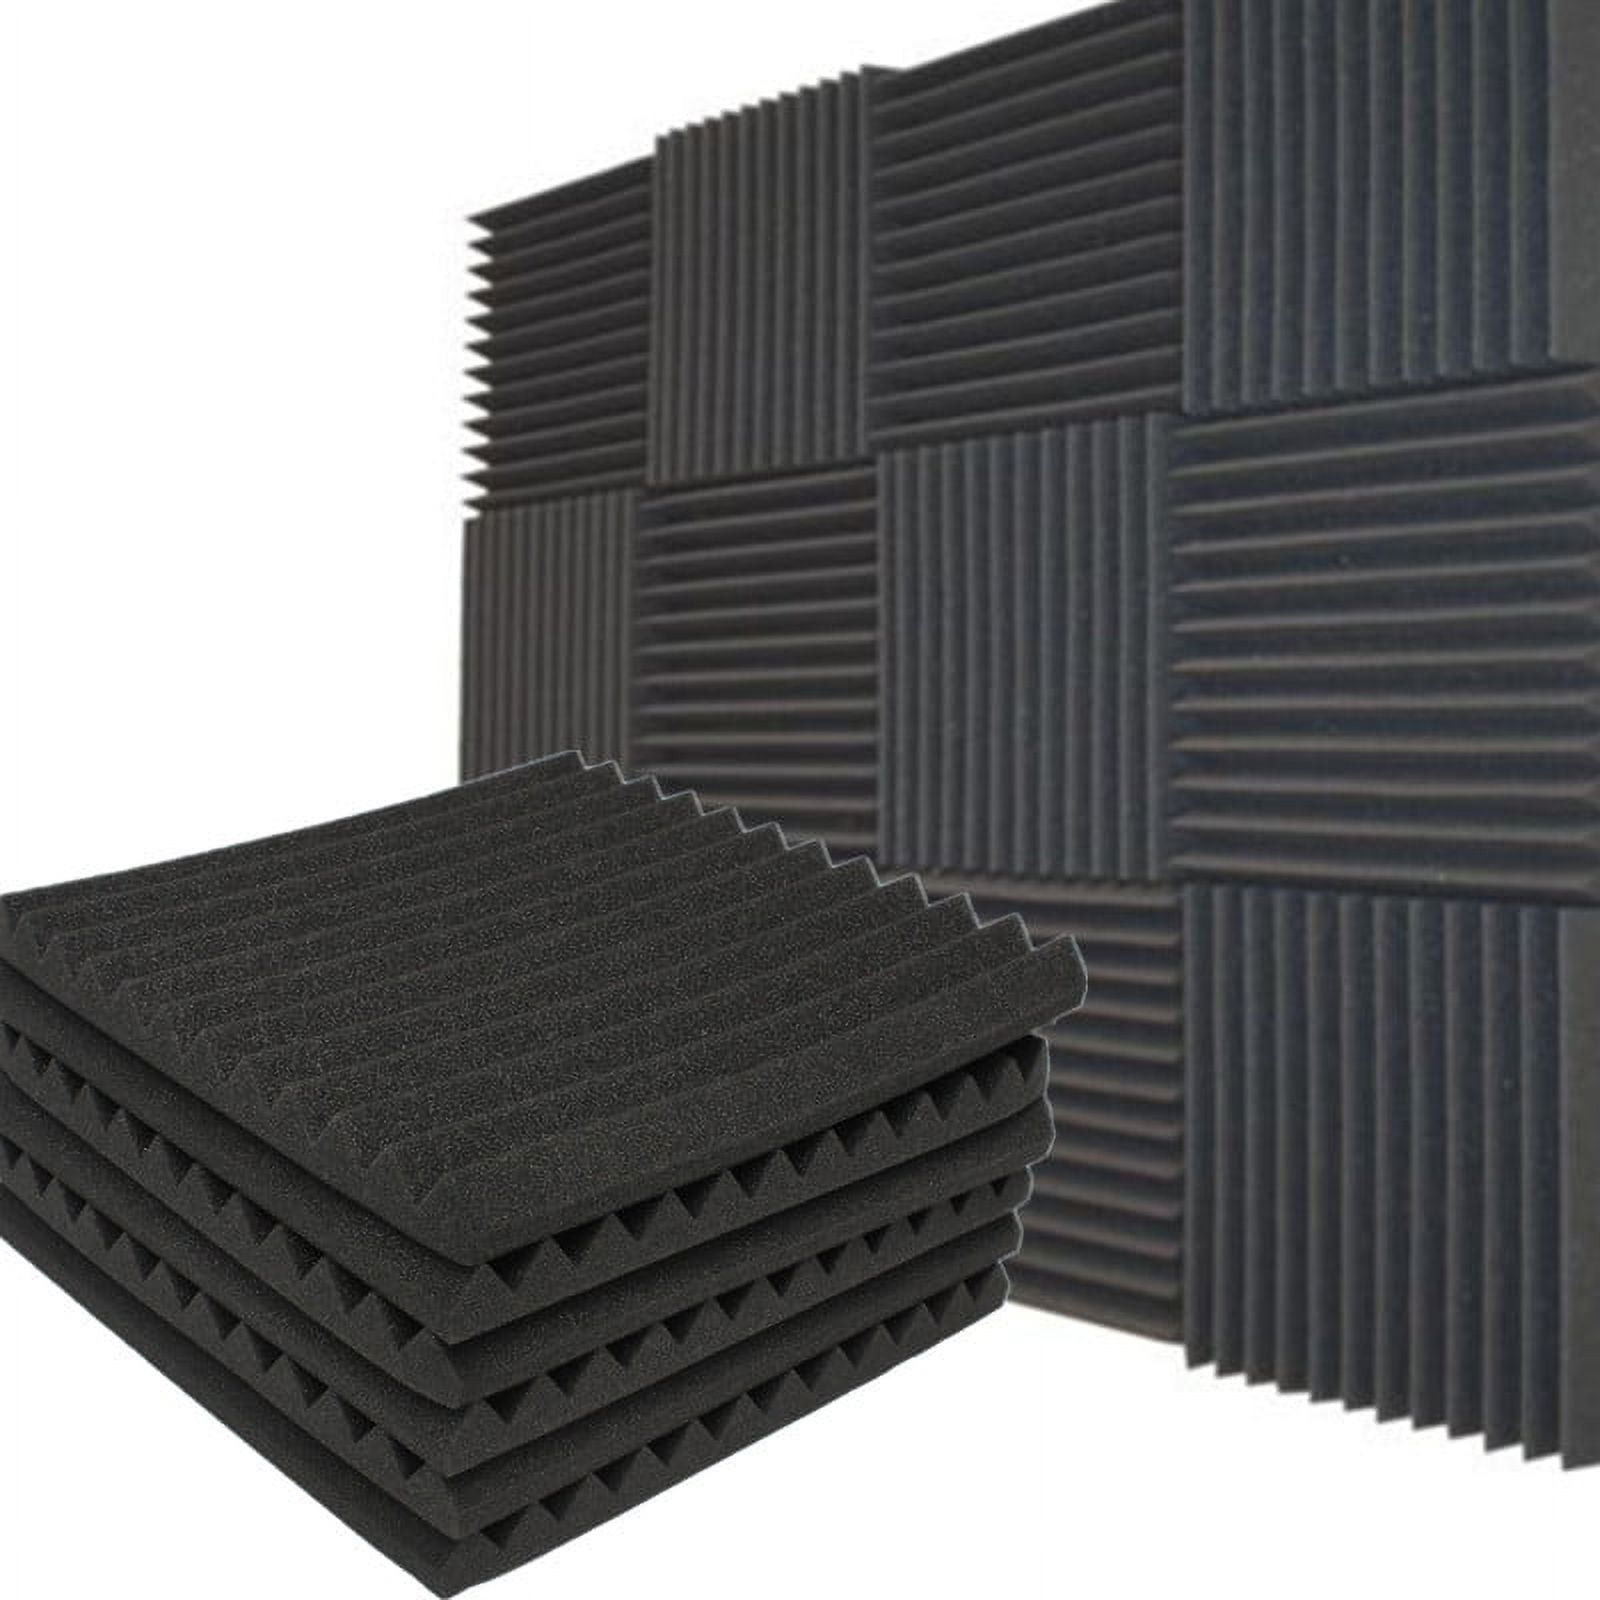 12 Pack Acoustic Panels Studio Soundproofing Foam Wedges Wall Foam Tiles  Sound Proof Sound Insulation Absorbing 12 X 12 X 1 